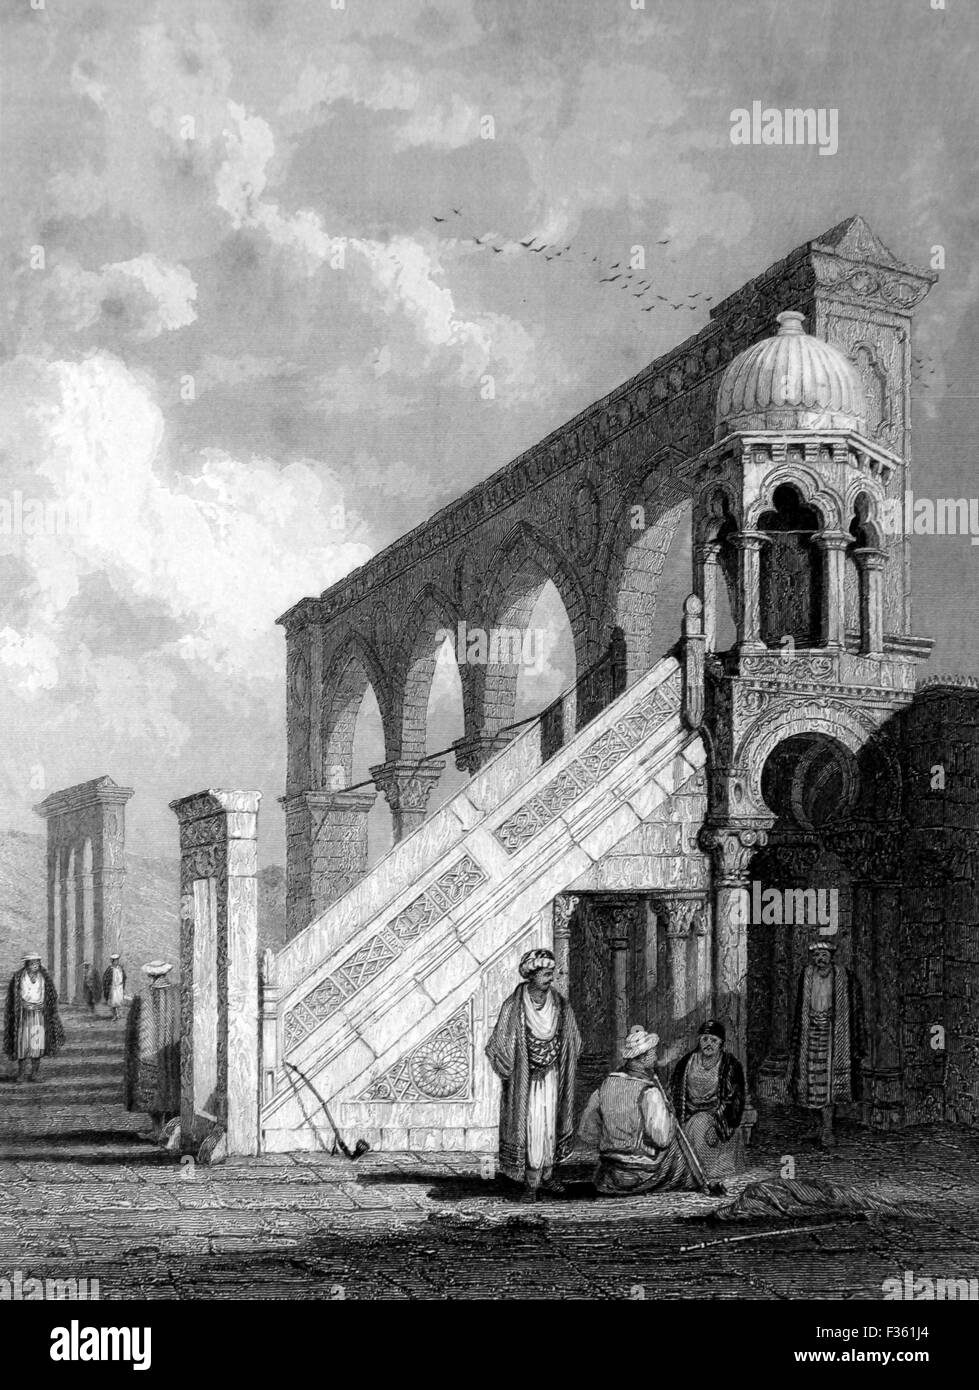 Jerusalem, 19th Century; Pulpit on the Platform. Mosque of Omar; Black and White Illustration from Landscapes of the Bible Stock Photo